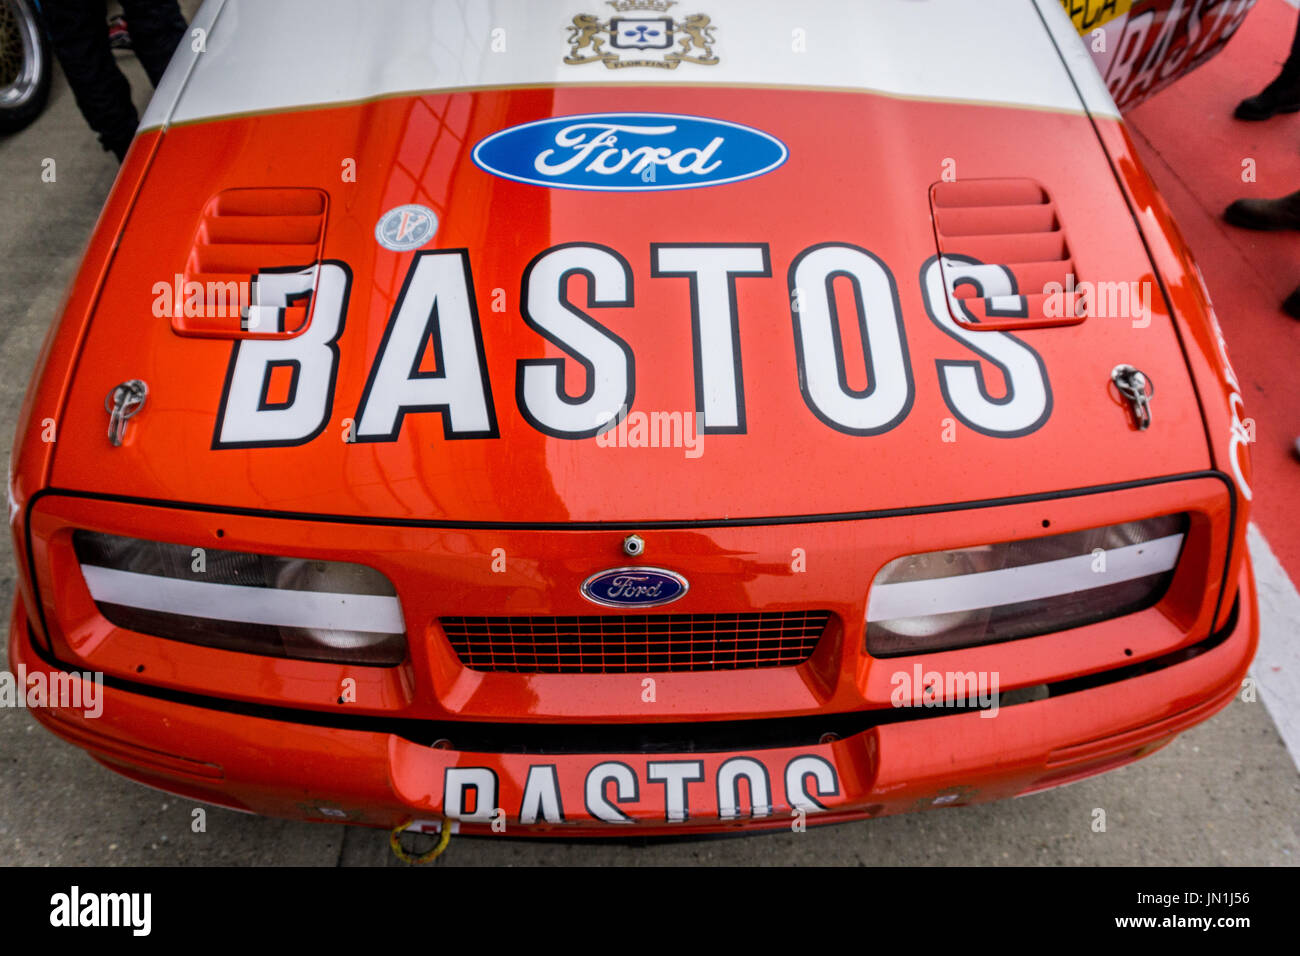 Towcester, Northamptonshire, UK. 29th July, 2017. Bastos Ford Sierra RS during Silverstone Classic Motor Racing Festival at Silverstone Circuit (Photo by Gergo Toth / Alamy Live News) Stock Photo